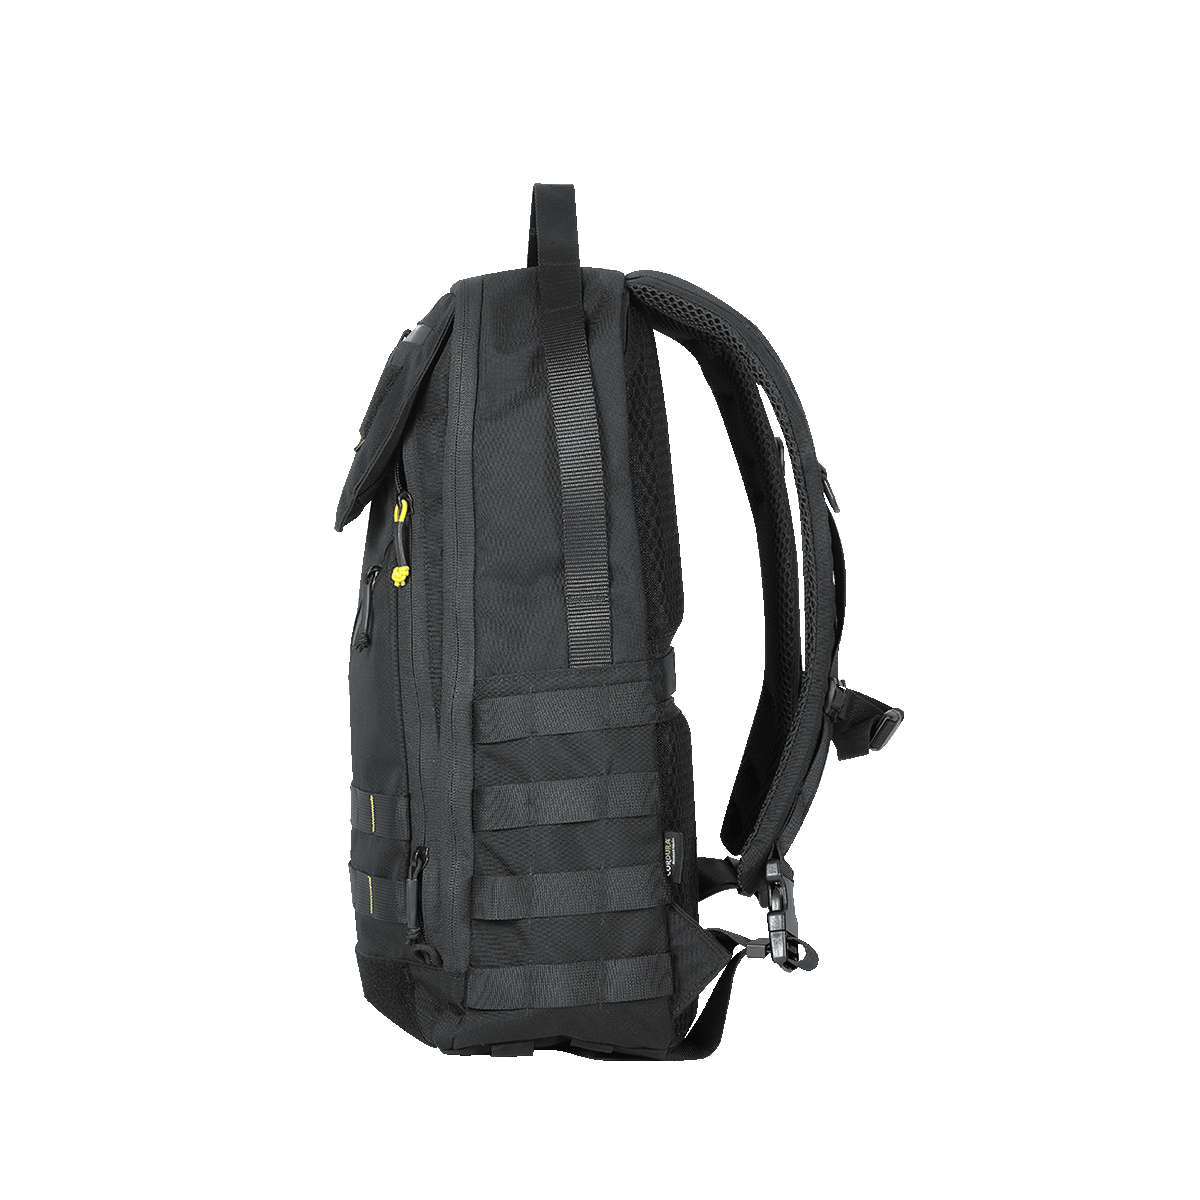 BP23 PRO QUICK ACCESS BACKPACK - 23L CAPACITY –  Singapore